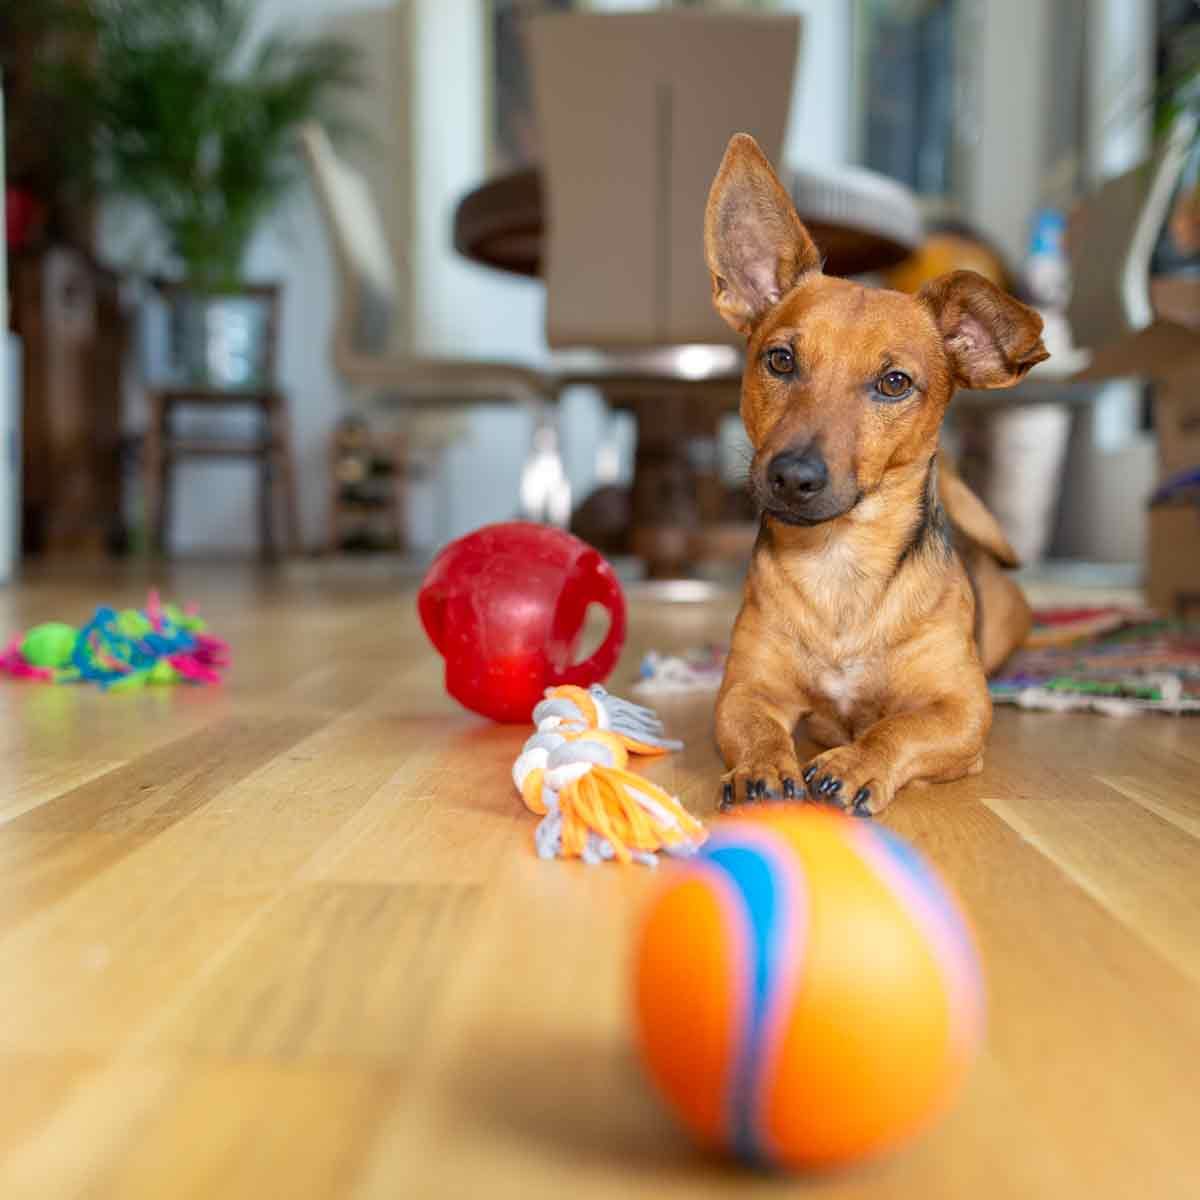 https://www.familyhandyman.com/wp-content/uploads/2019/11/Little-dog-at-home-in-the-living-room-playing-with-his-toys-shutterstock_1256513359.jpg